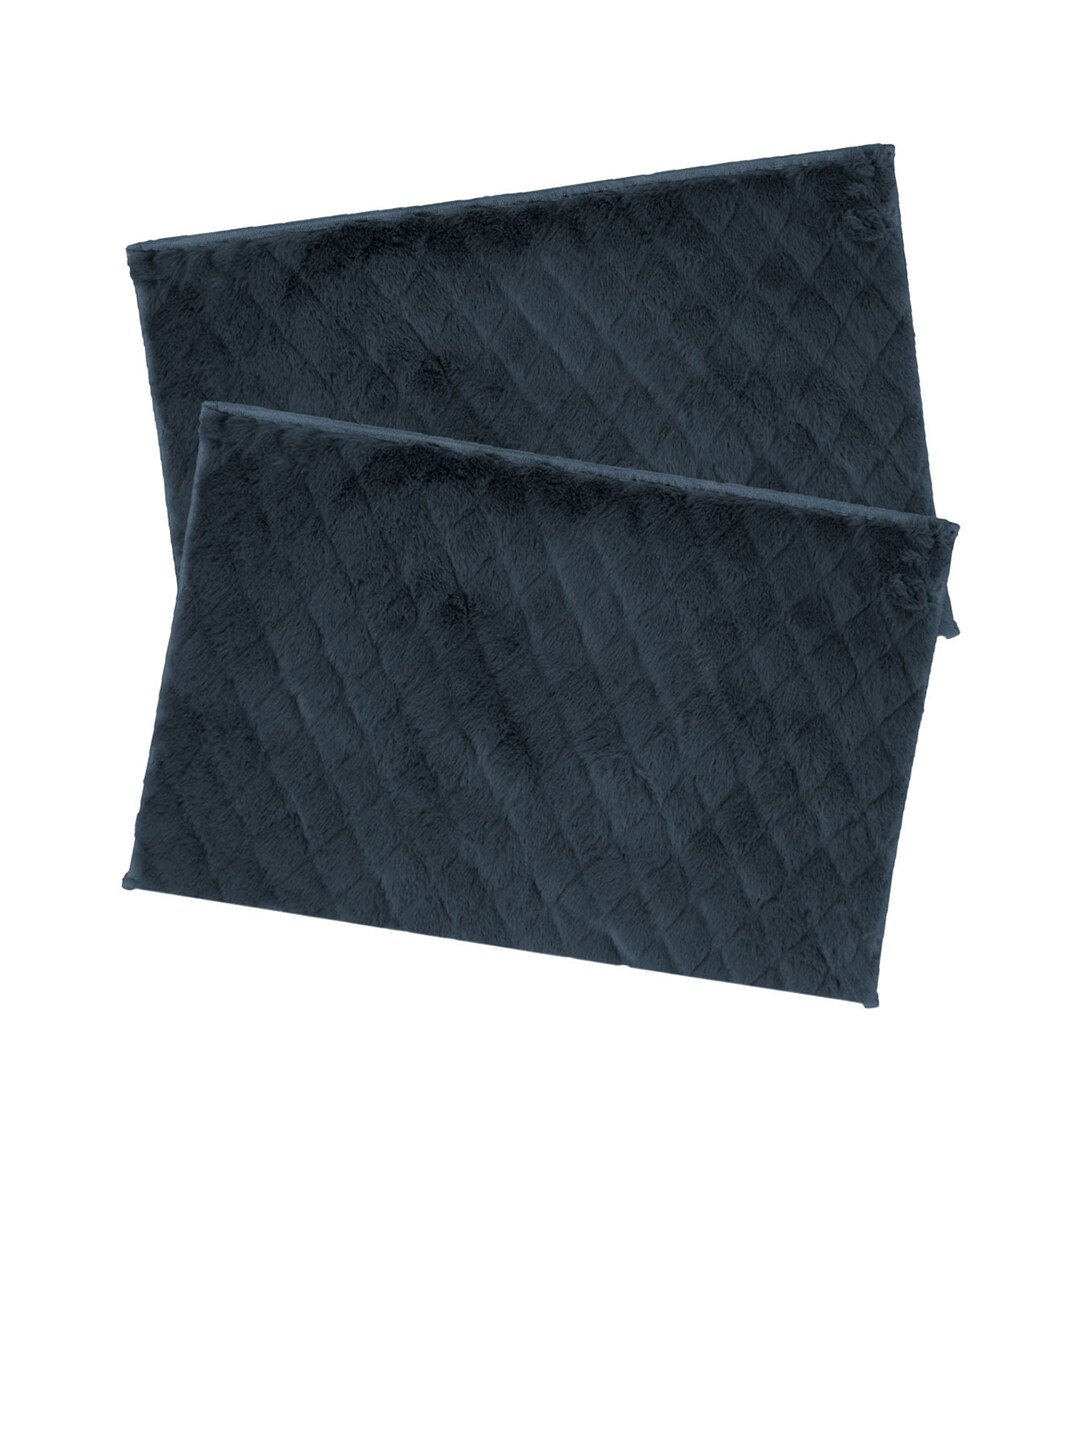 LUXEHOME INTERNATIONAL Set Of 2 Black Solid Bath Rugs 1000 GSM Price in India